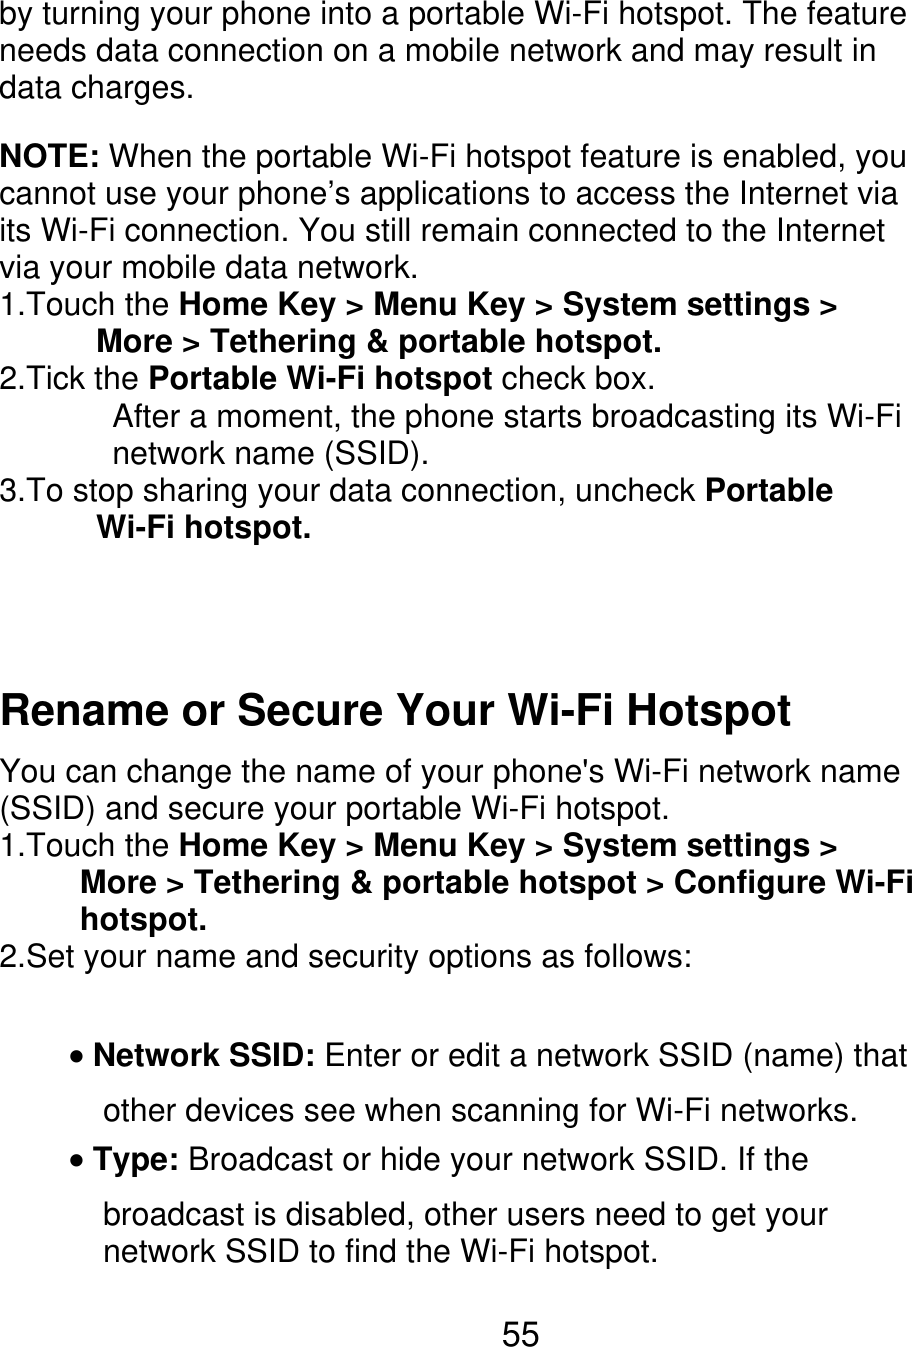 by turning your phone into a portable Wi-Fi hotspot. The feature needs data connection on a mobile network and may result in data charges. NOTE: When the portable Wi-Fi hotspot feature is enabled, you cannot use your phone’s applications to access the Internet via its Wi-Fi connection. You still remain connected to the Internet via your mobile data network. 1.Touch the Home Key &gt; Menu Key &gt; System settings &gt;       More &gt; Tethering &amp; portable hotspot. 2.Tick the Portable Wi-Fi hotspot check box.        After a moment, the phone starts broadcasting its Wi-Fi        network name (SSID). 3.To stop sharing your data connection, uncheck Portable       Wi-Fi hotspot. Rename or Secure Your Wi-Fi Hotspot You can change the name of your phone&apos;s Wi-Fi network name (SSID) and secure your portable Wi-Fi hotspot. 1.Touch the Home Key &gt; Menu Key &gt; System settings &gt;           More &gt; Tethering &amp; portable hotspot &gt; Configure Wi-Fi      hotspot. 2.Set your name and security options as follows: Network SSID: Enter or edit a network SSID (name) that other devices see when scanning for Wi-Fi networks. Type: Broadcast or hide your network SSID. If the broadcast is disabled, other users need to get your network SSID to find the Wi-Fi hotspot. 55 